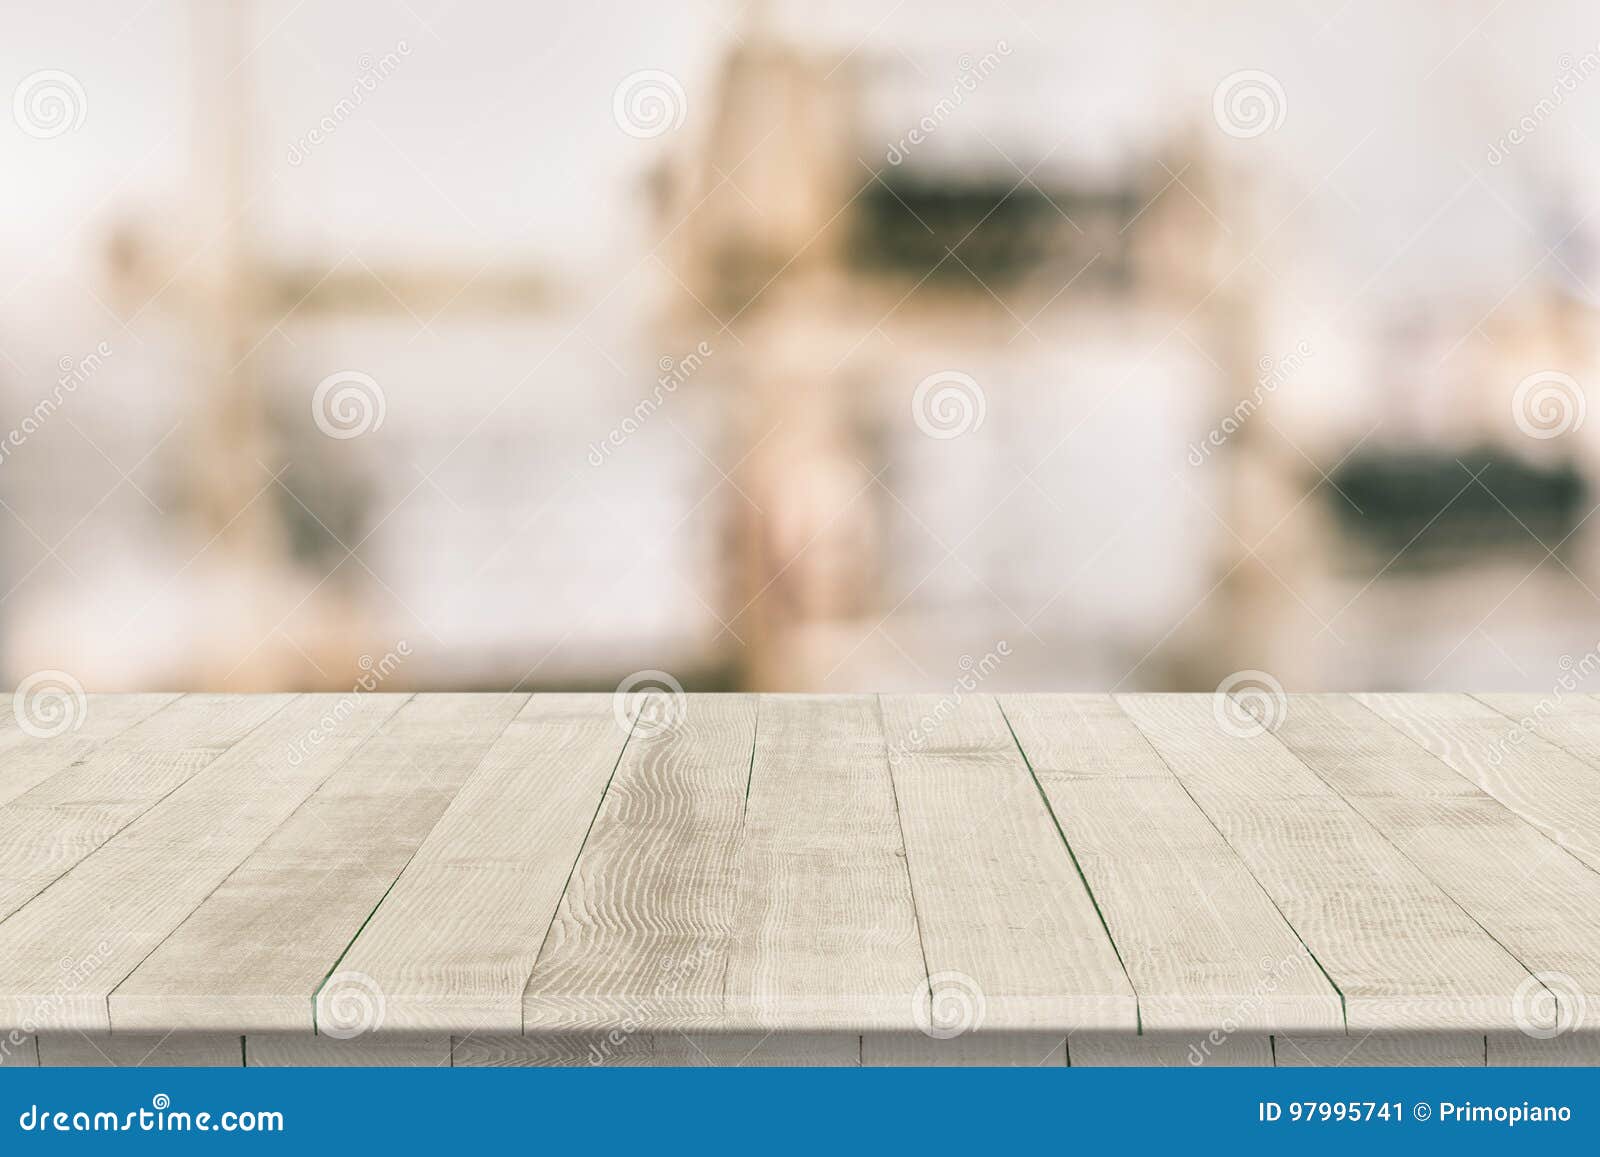 wooden tabletop perspective for product placement